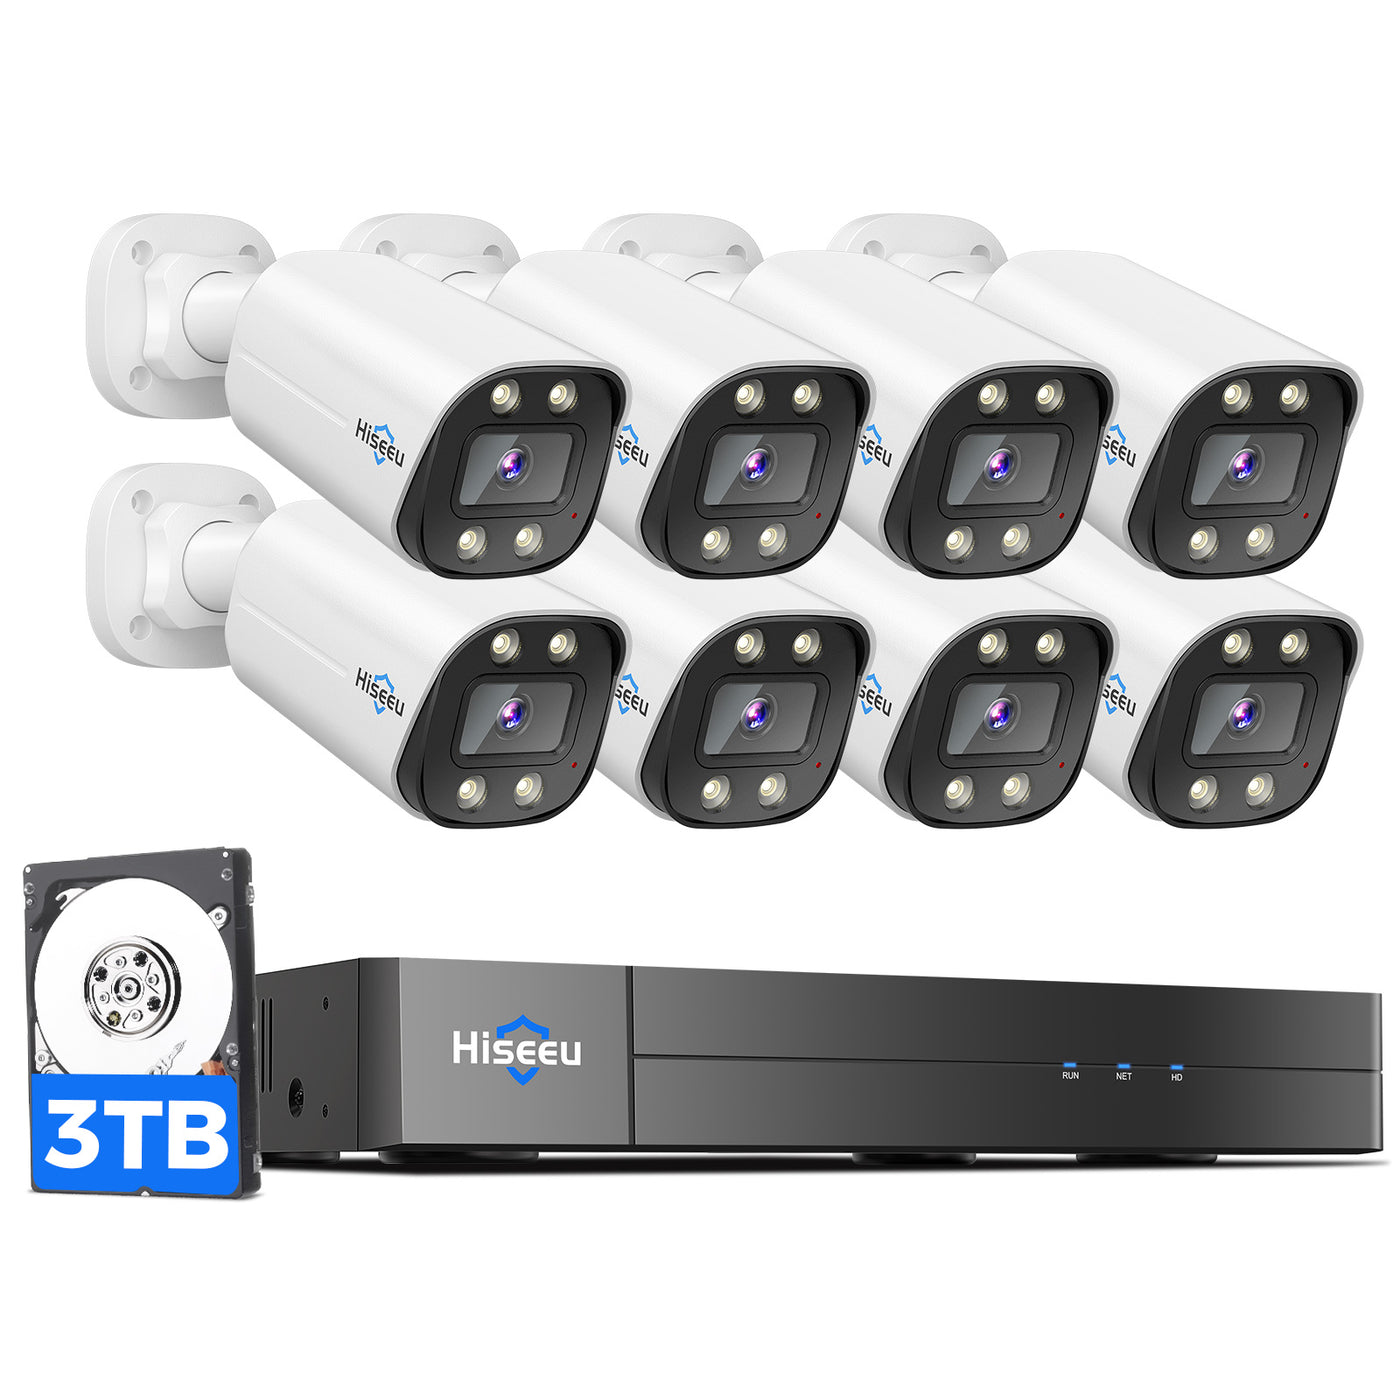 Hiseeu [4K HD+Color Night Vision] PoE Security Camera System, Home Security System w/ 8 MP PoE Cameras, 121°Wide Angle, Human Vehicle Detect, 2 Way Audio, 16ch NVR for Home Surveillance Indoor&Outdoor